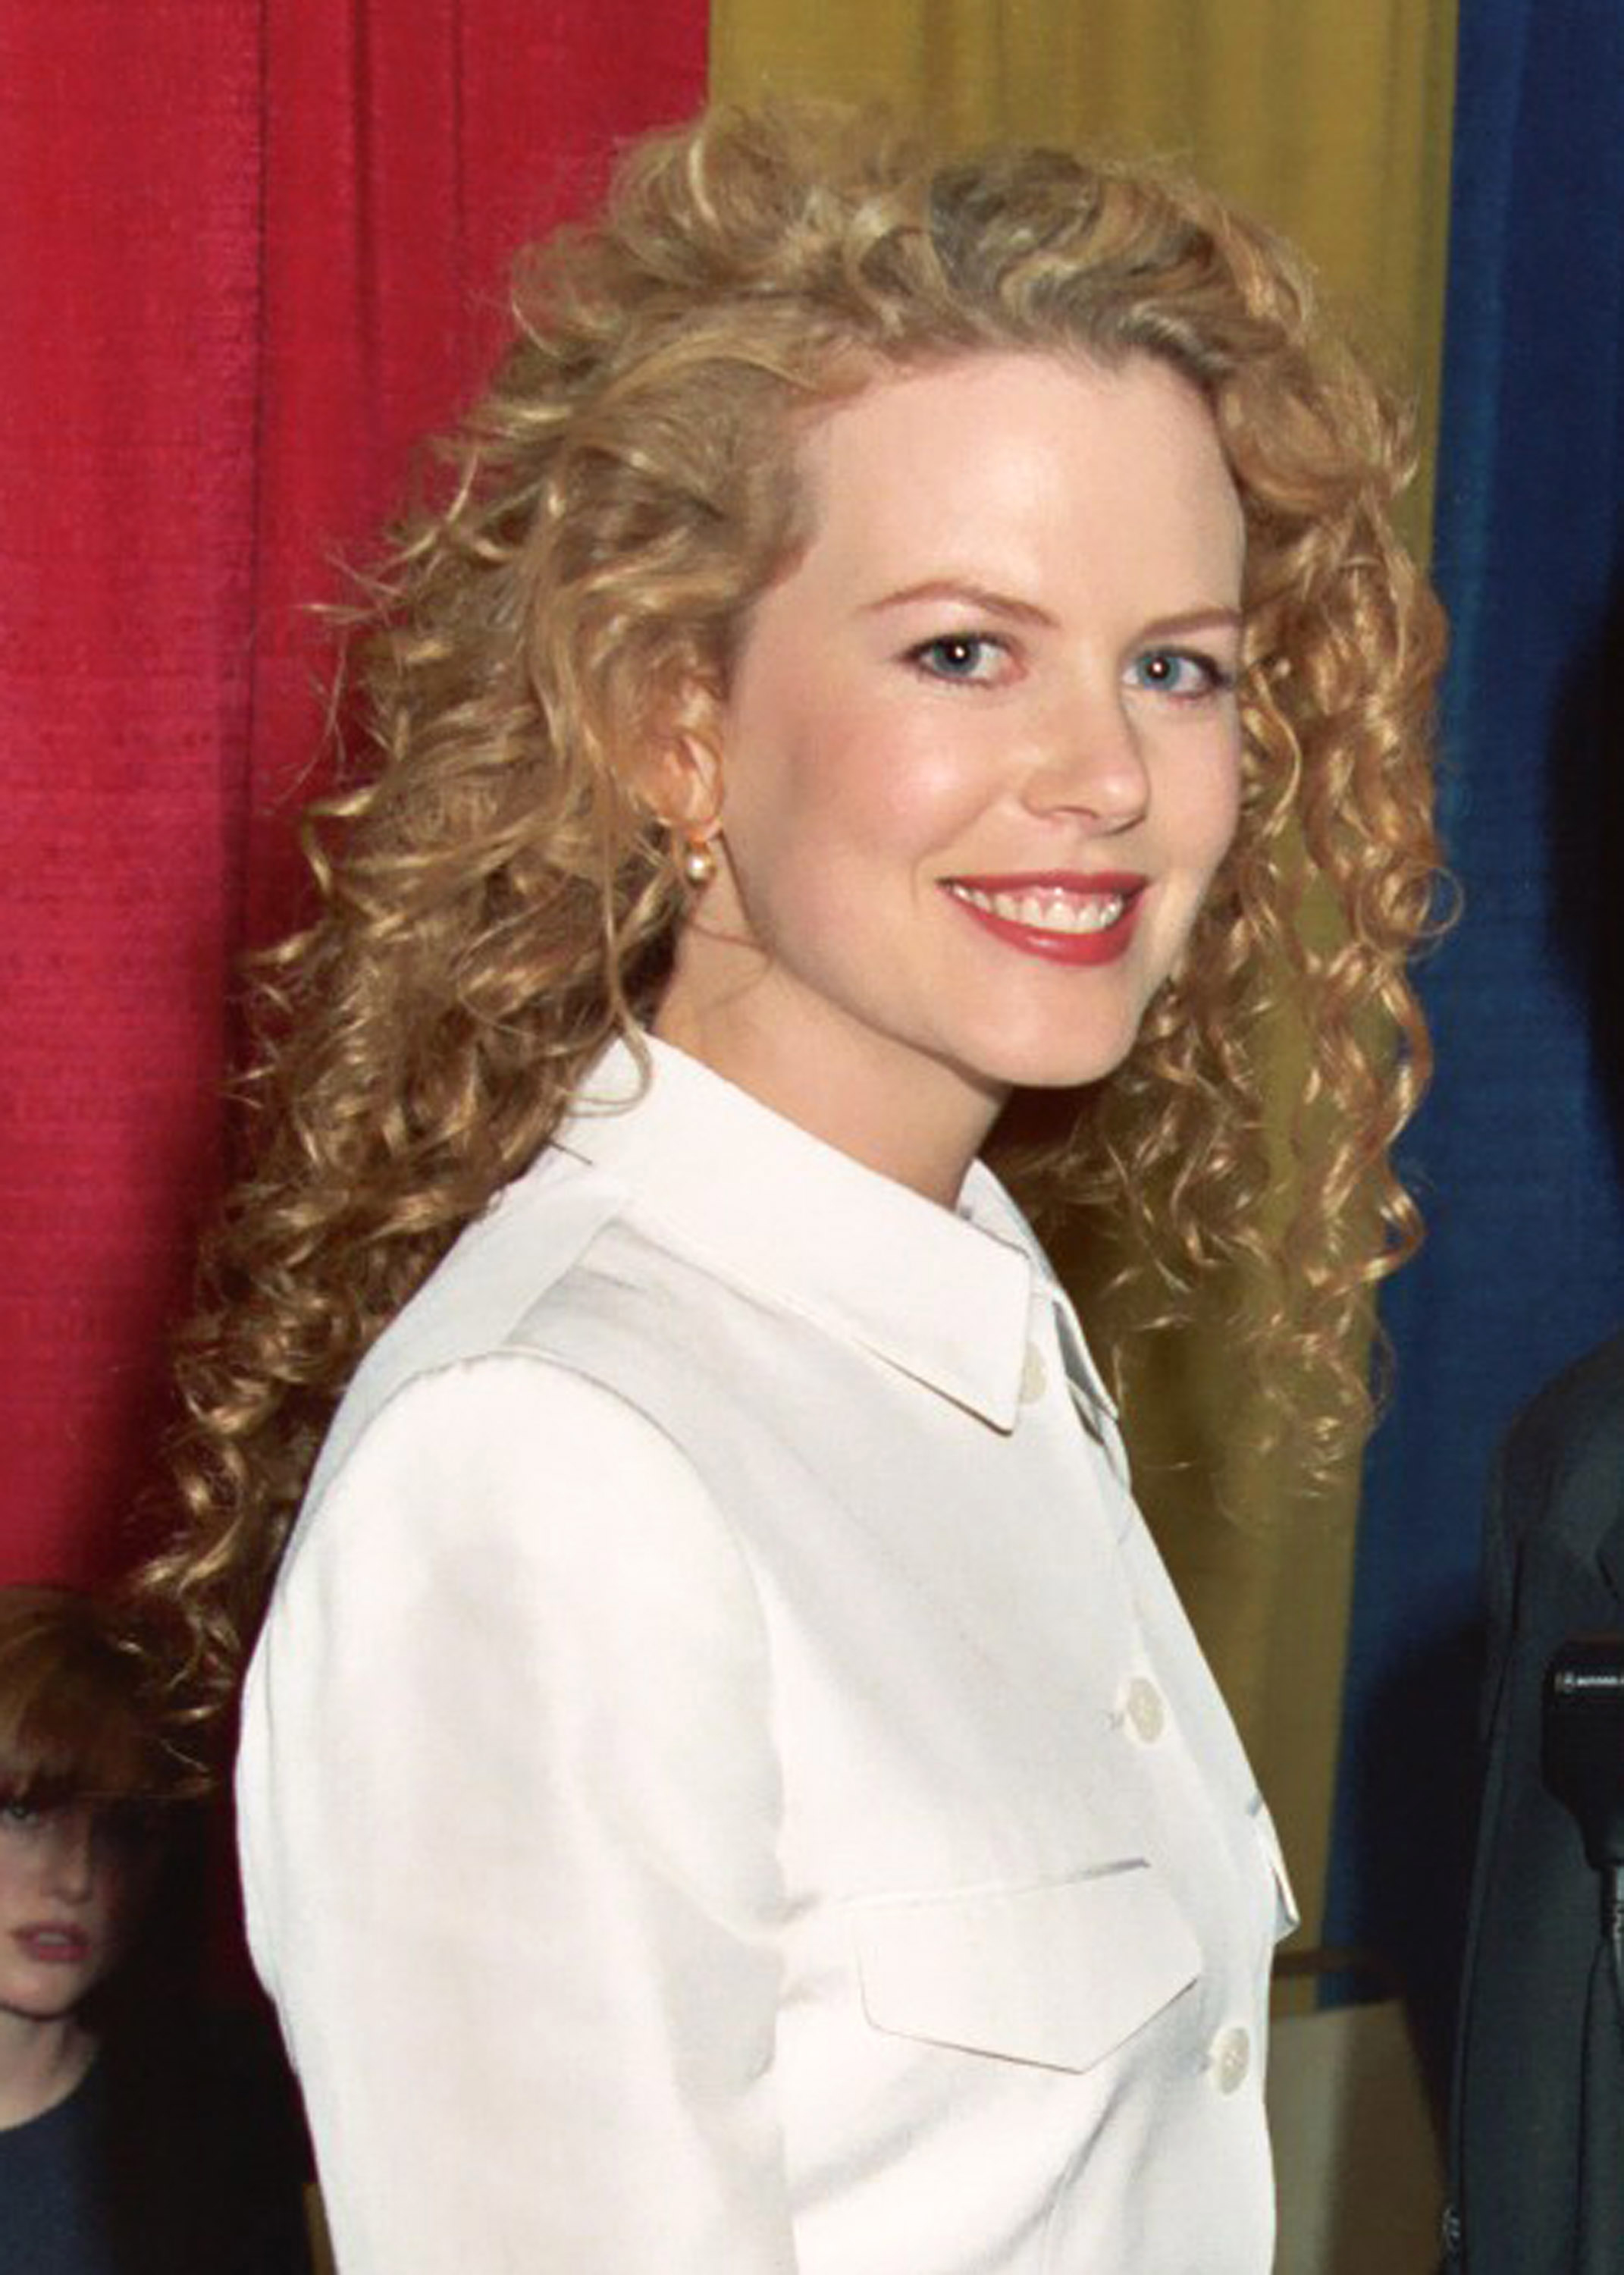 A close-up of a smiling Nicole with curly hair